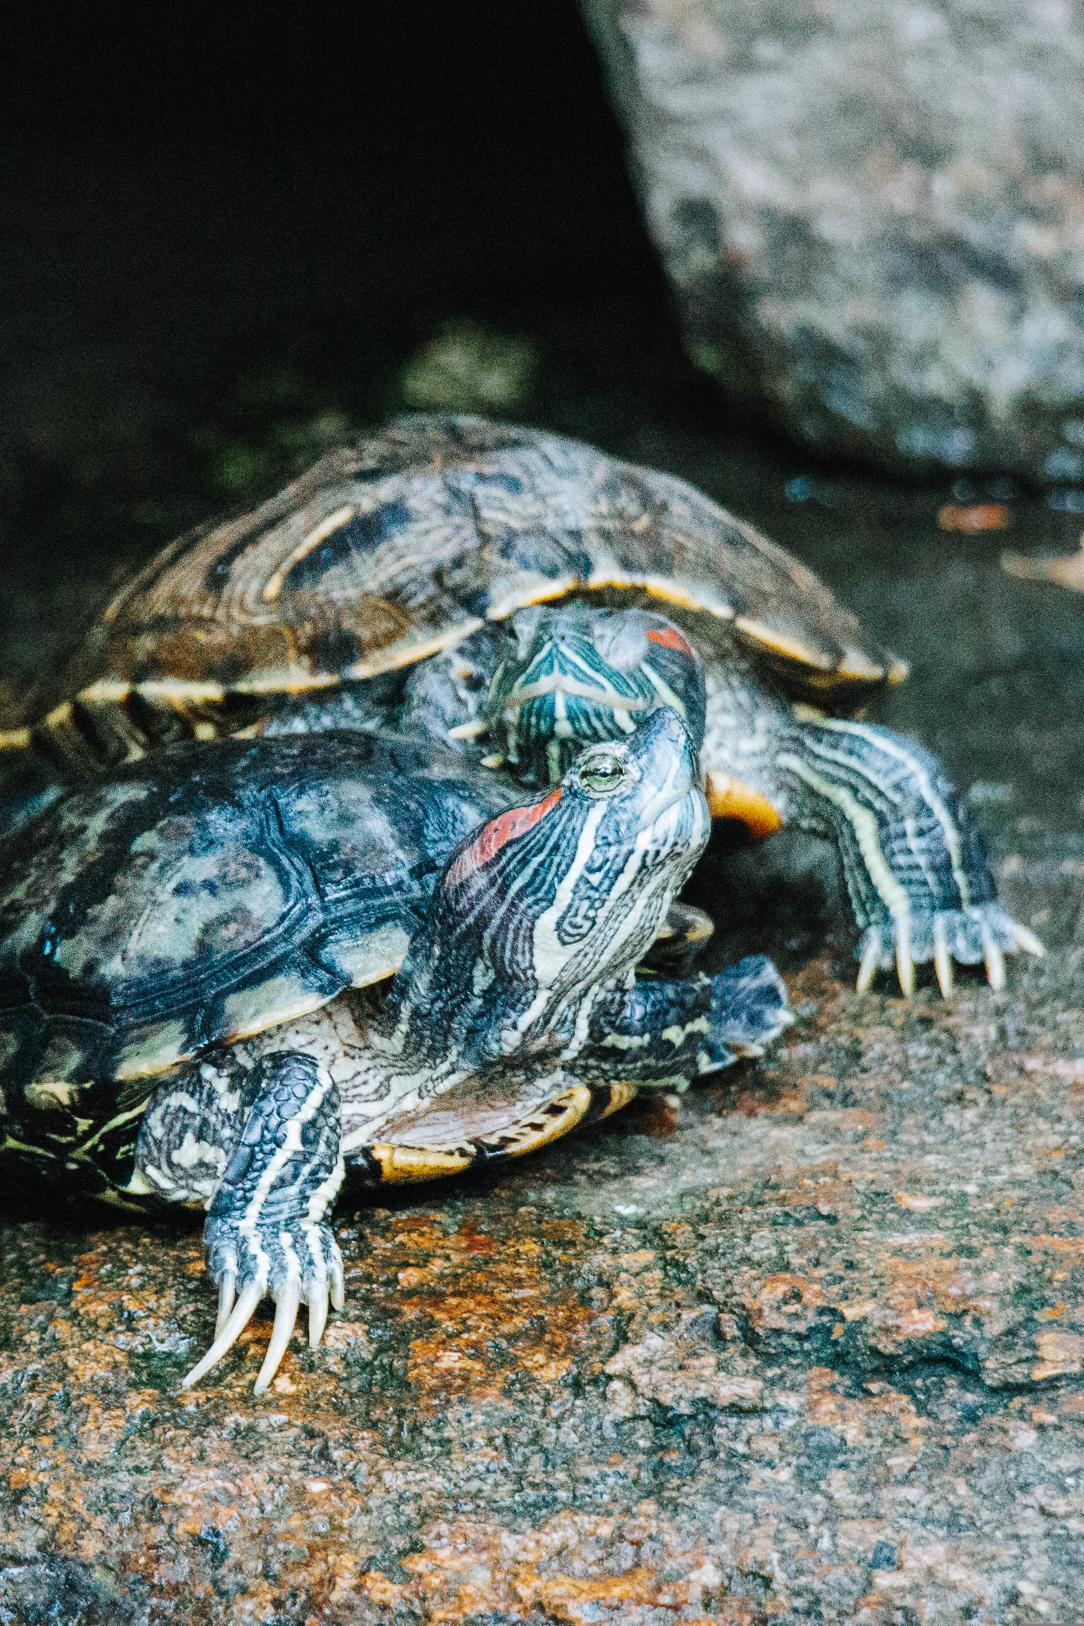 Symptoms of a lack of appetite in turtles